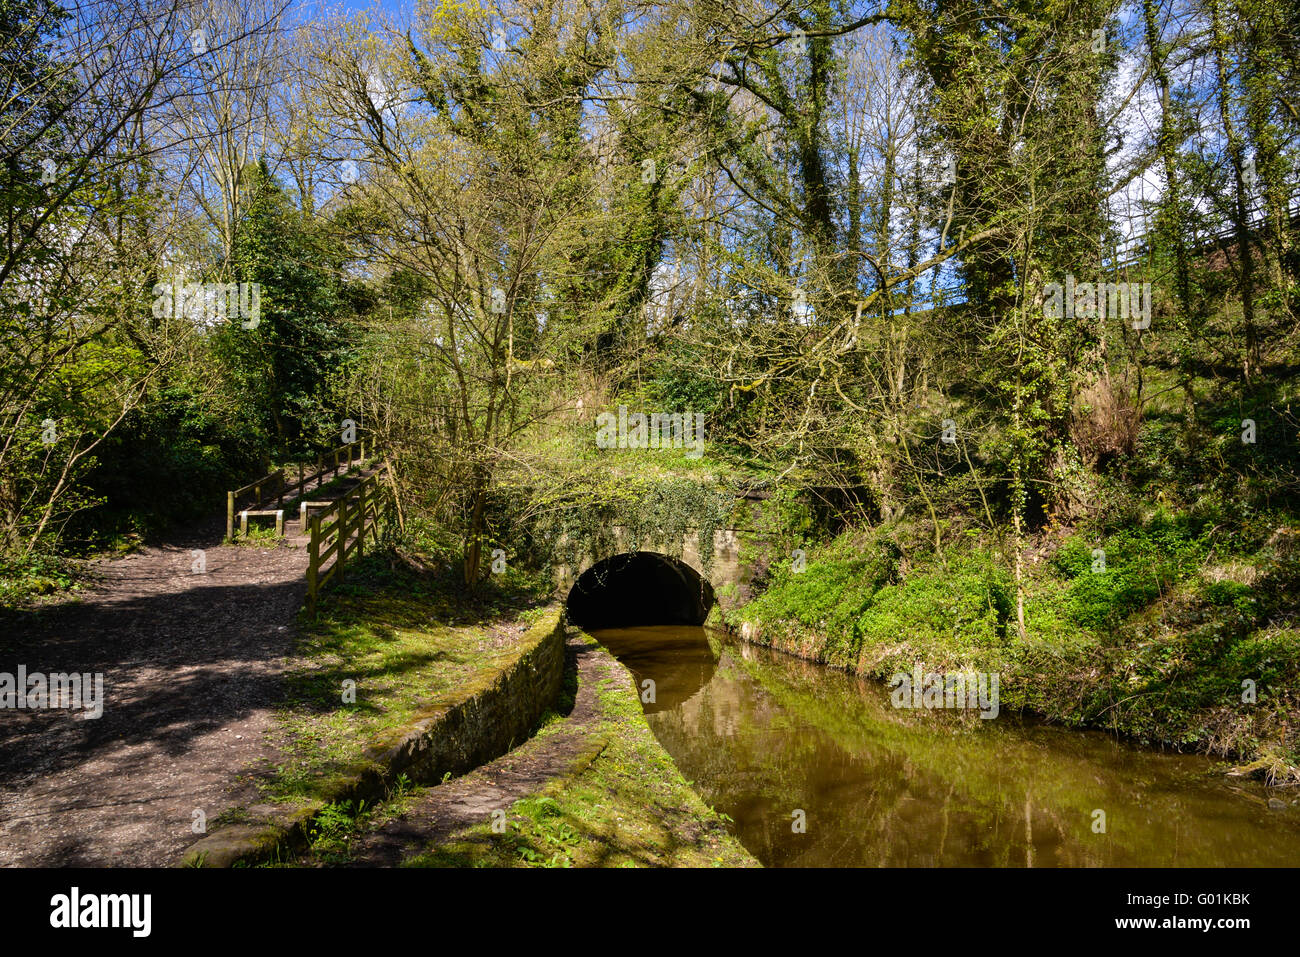 A beautiful spring day on the Peak Forest canal near Marple, Stockport. Stock Photo